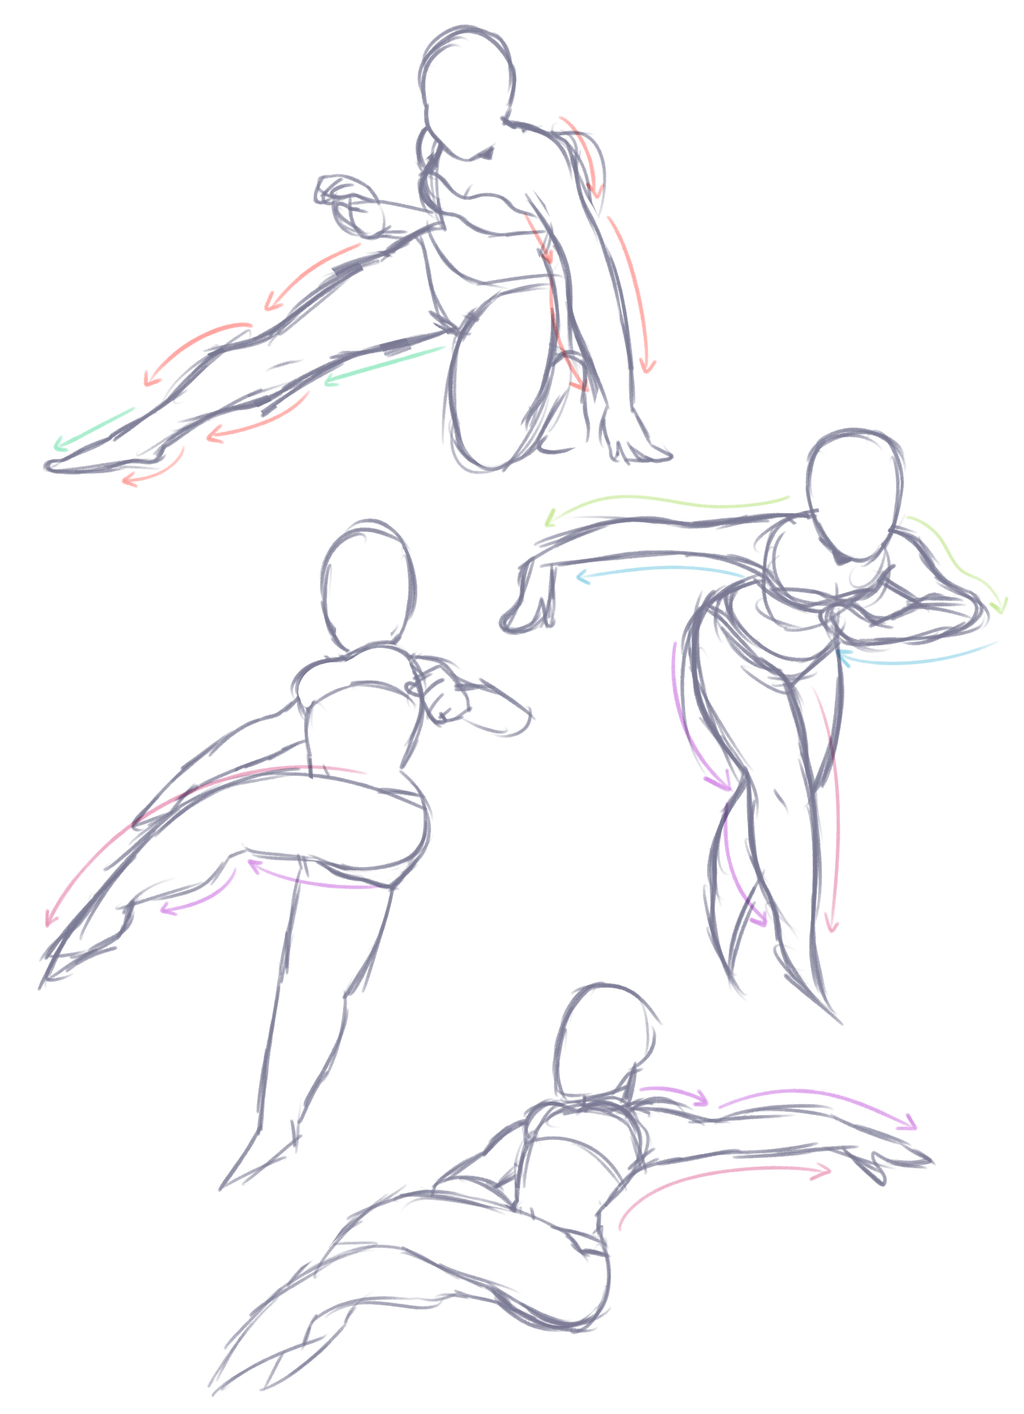 Couple poses reference sheet by Shesvii on DeviantArt, romantic drawing  reference